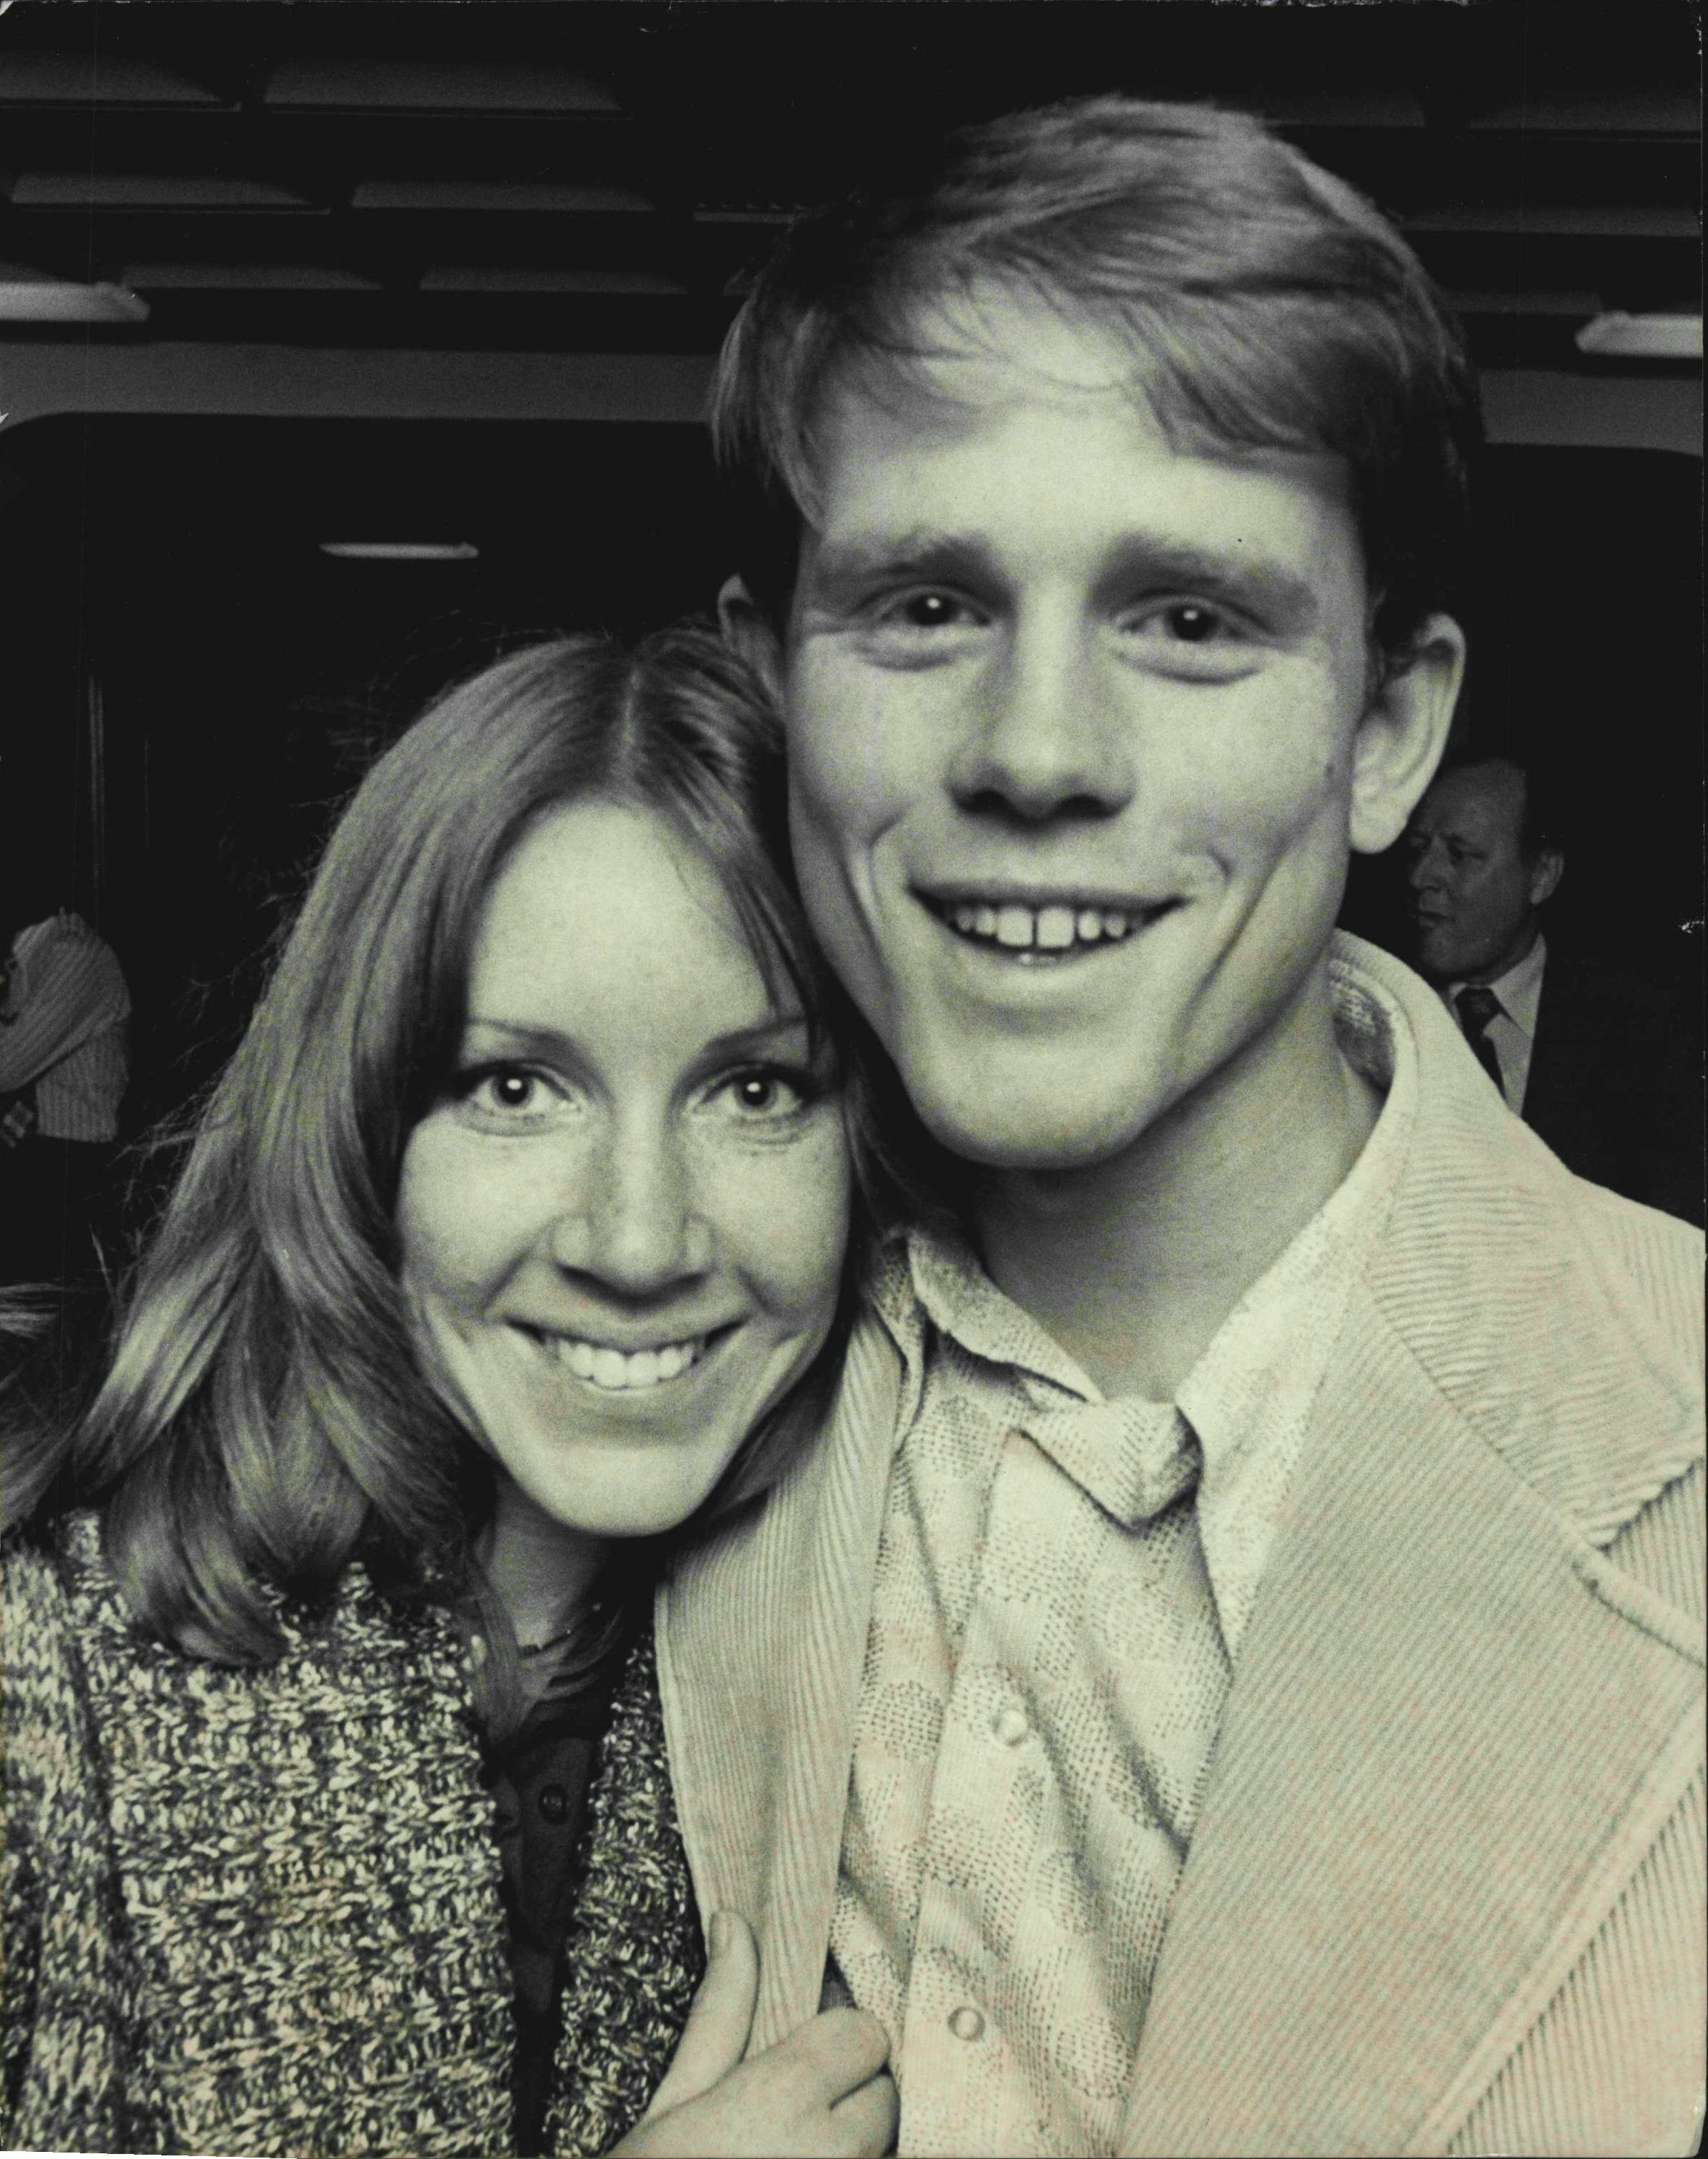 Ron Howard and his wife Cheryl Howard at press reception in 1975. | Source: Getty Images 